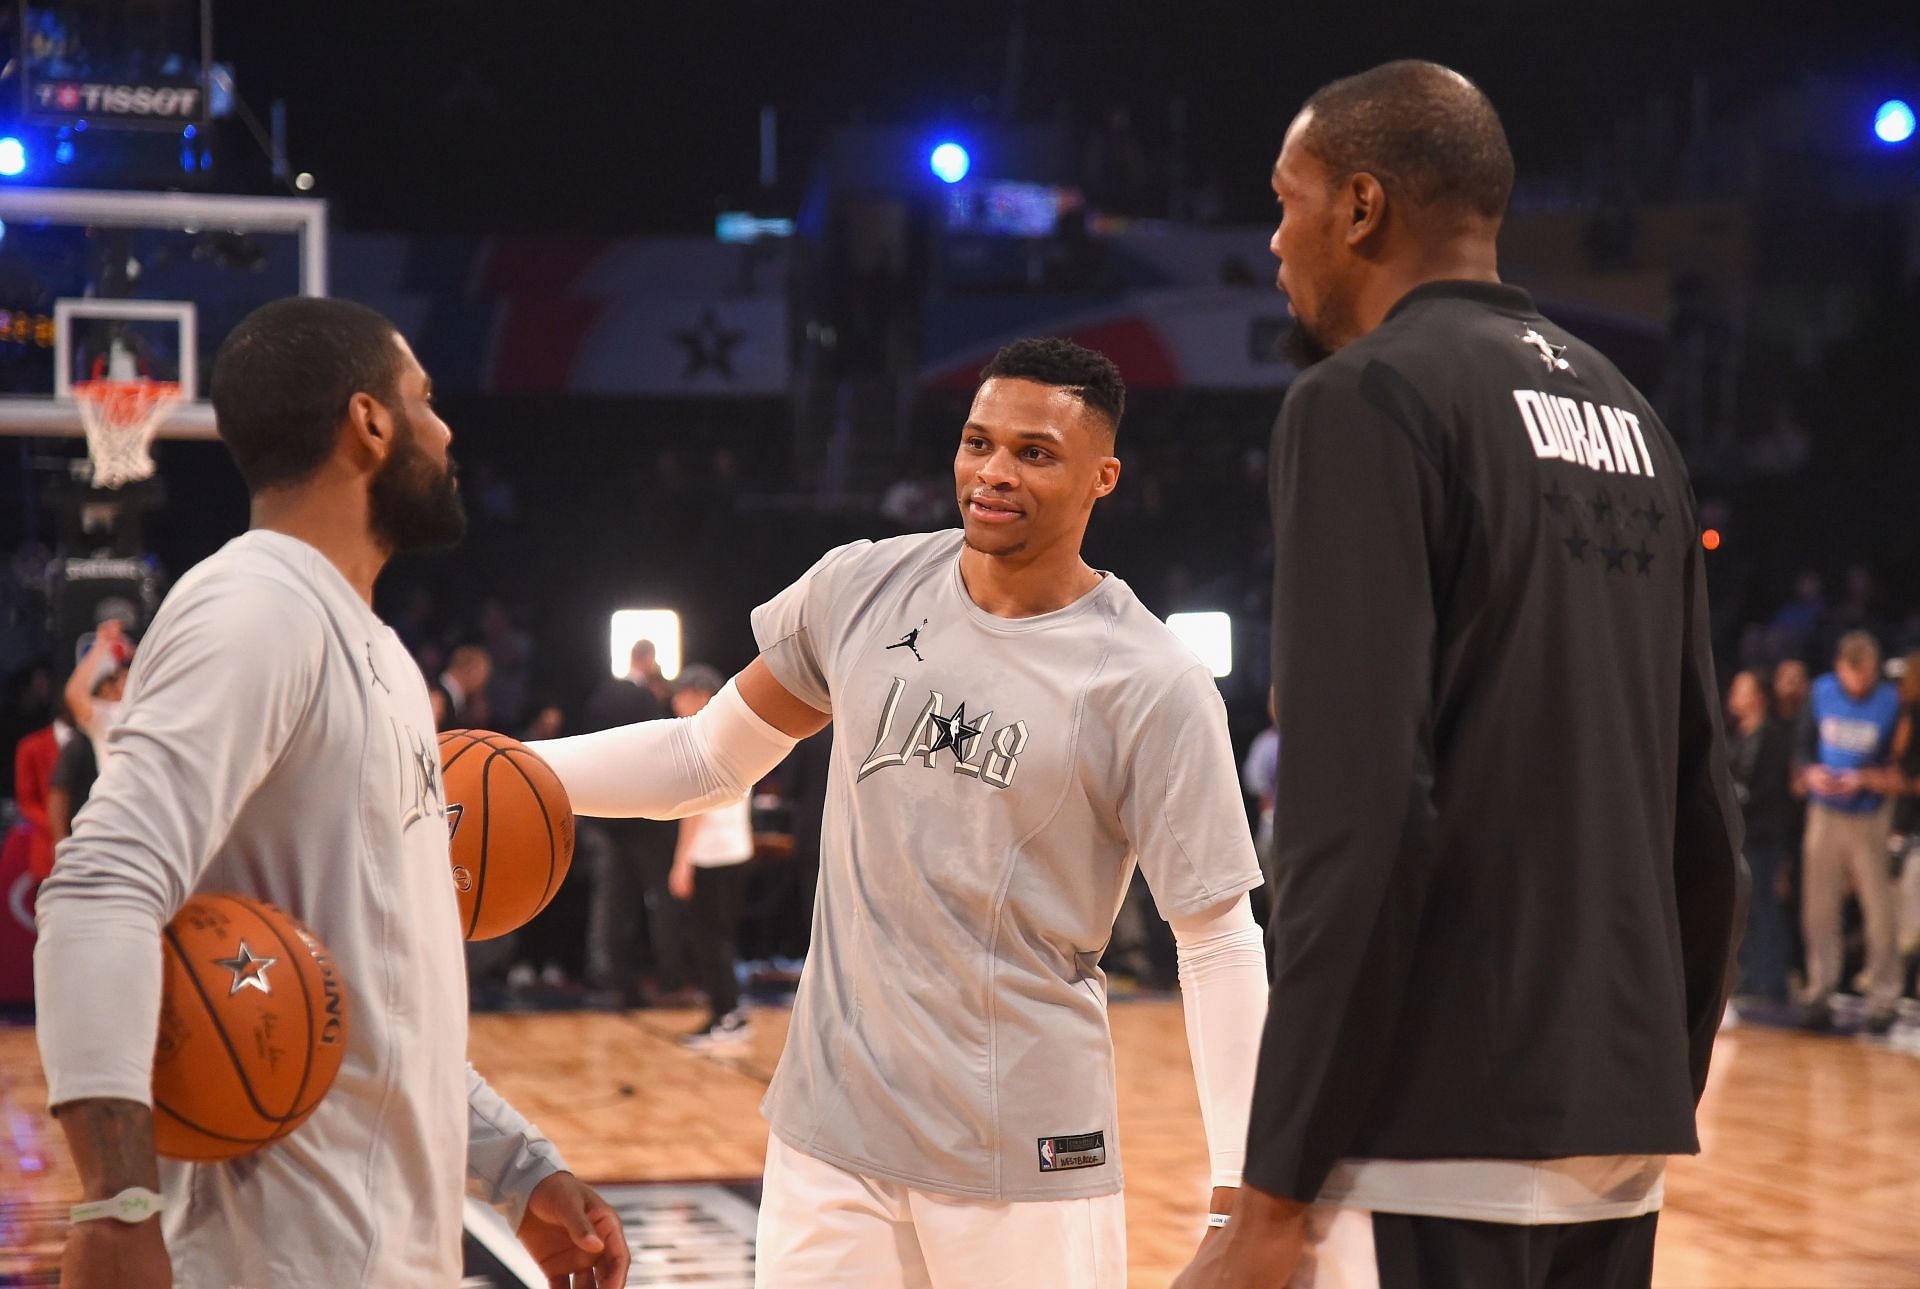 Kyrie Irving, Russell Westbrook and Kevin Duran at the 2018 NBA All-Star Game